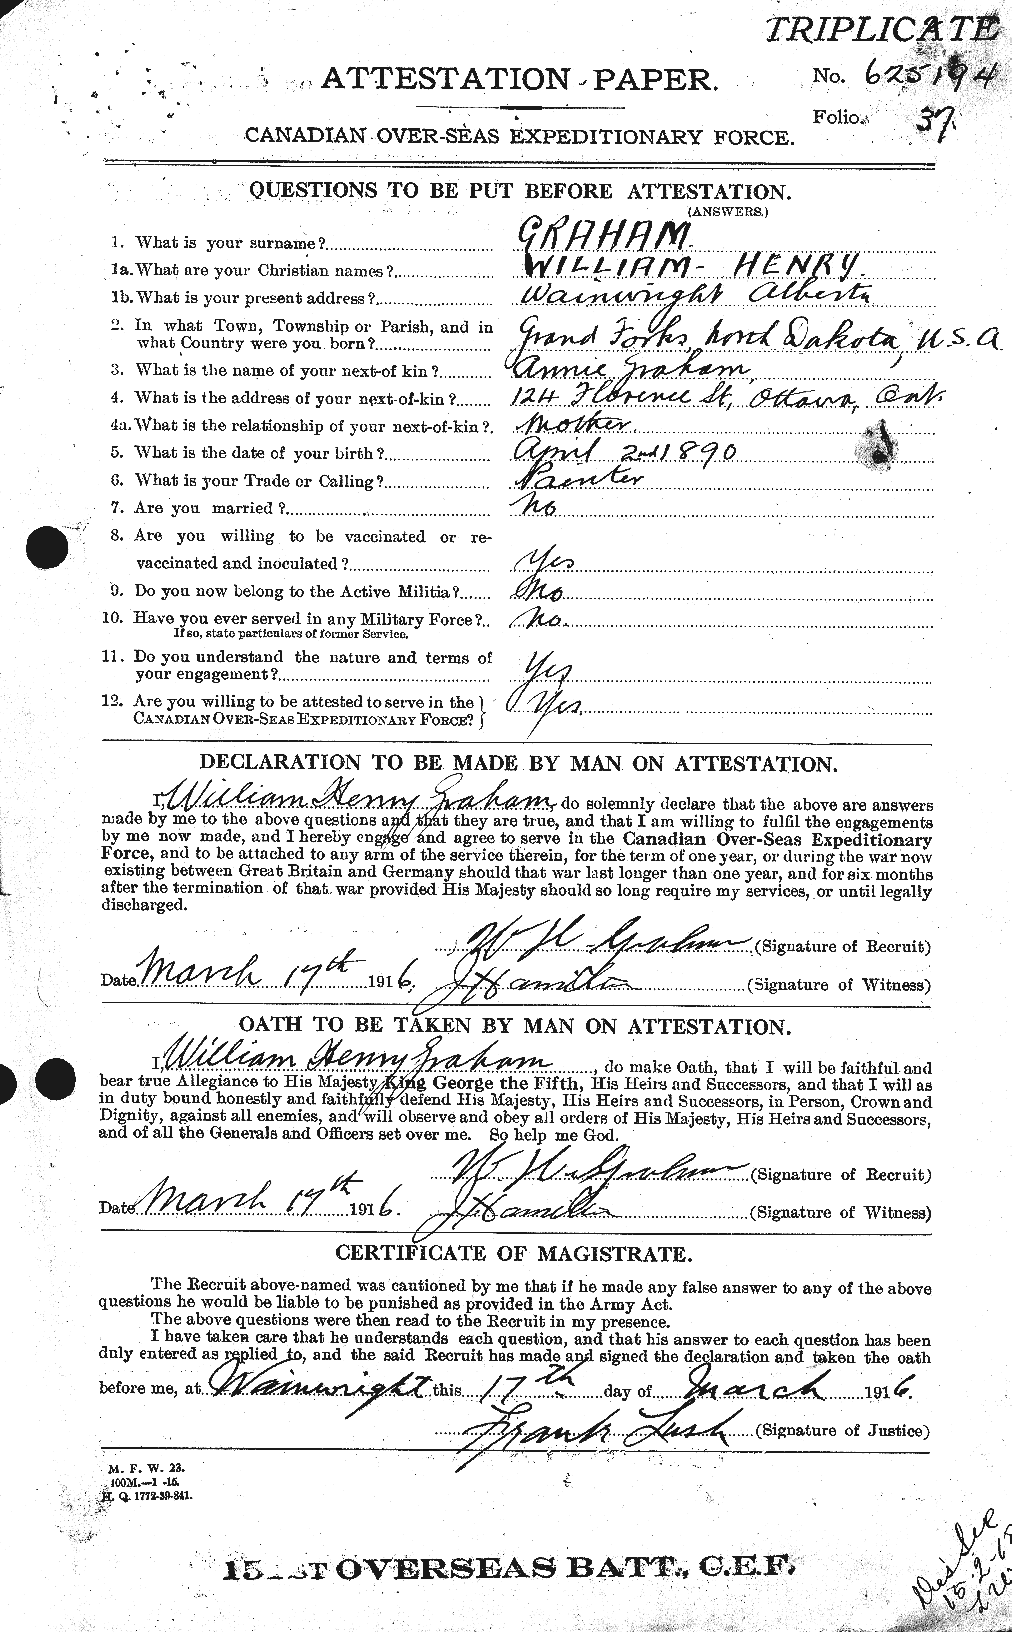 Personnel Records of the First World War - CEF 358001a